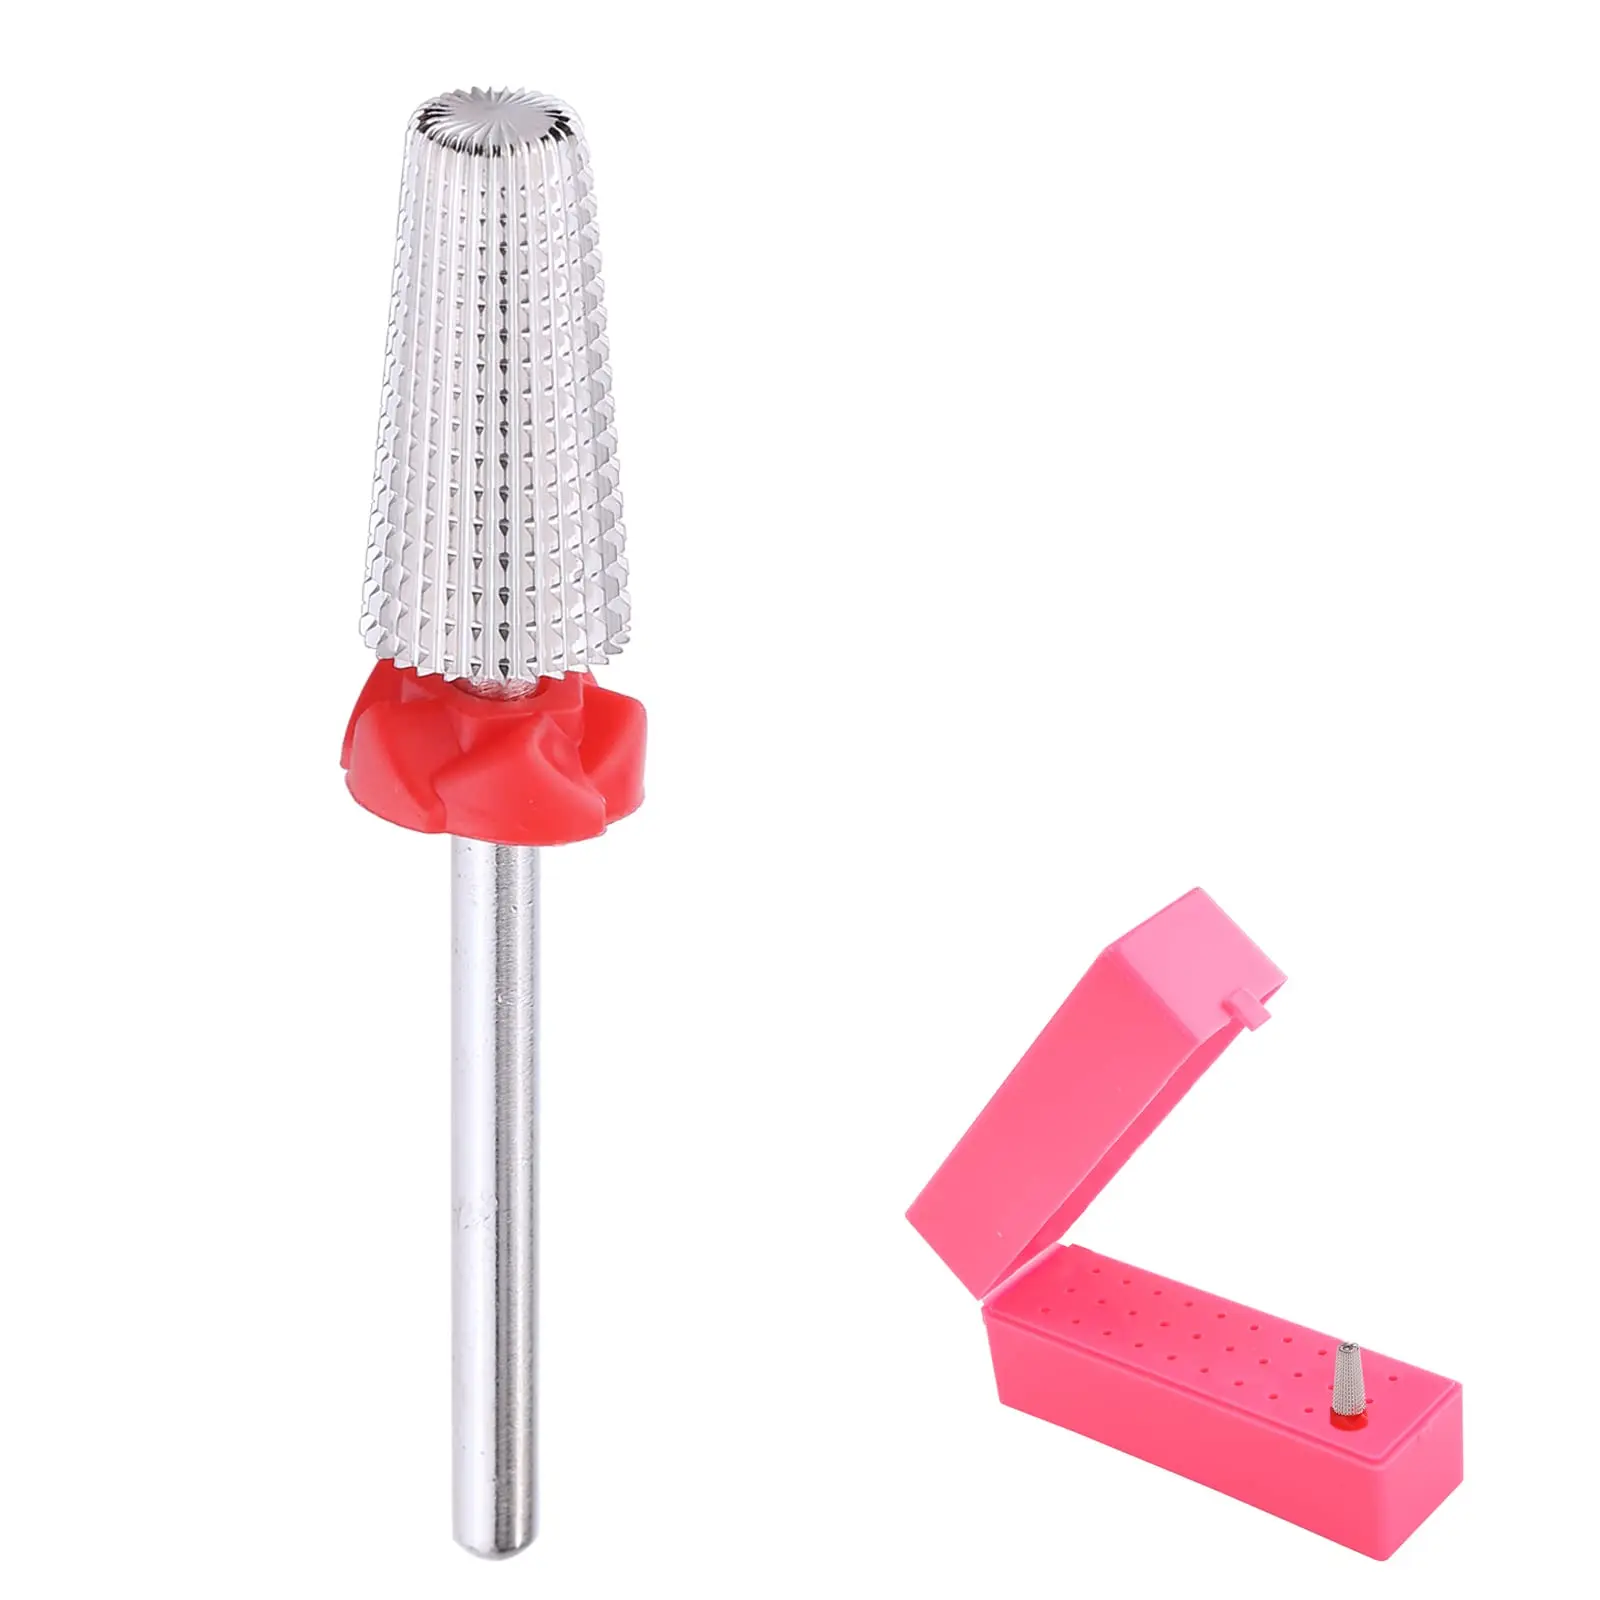 5 In 1 Nail Drill Bits Tungsten Milling Cutter with Pink 30 Holes Nail Bits Holder Storage Safety Cut Manicure Nail Tools